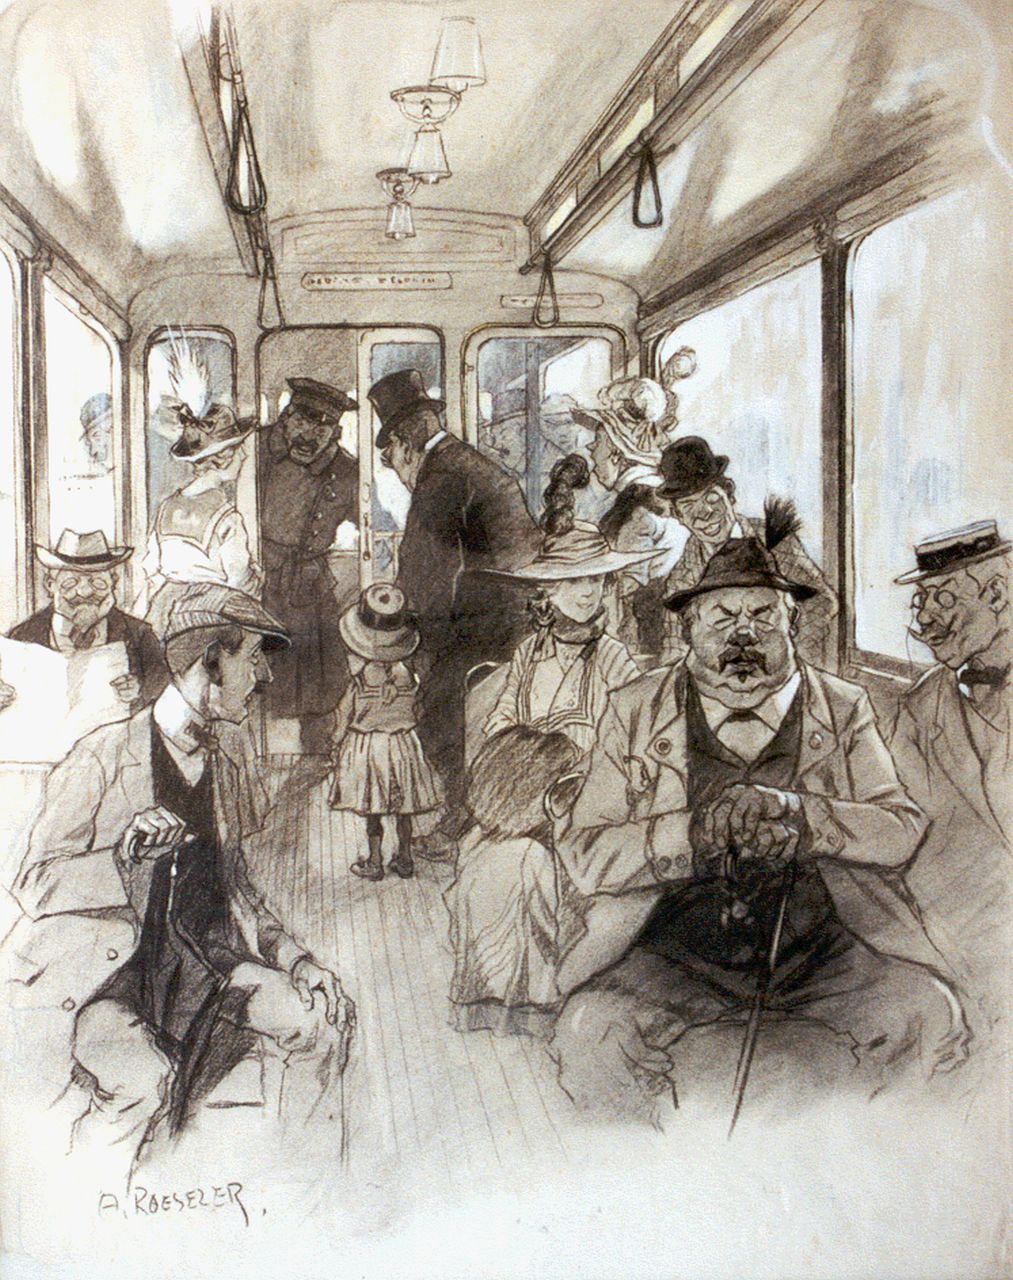 Roeseler A.  | August Roeseler, Grandfather and child in a tram, gouache and charcoal on paper 69.0 x 54.0 cm, signed l.l.